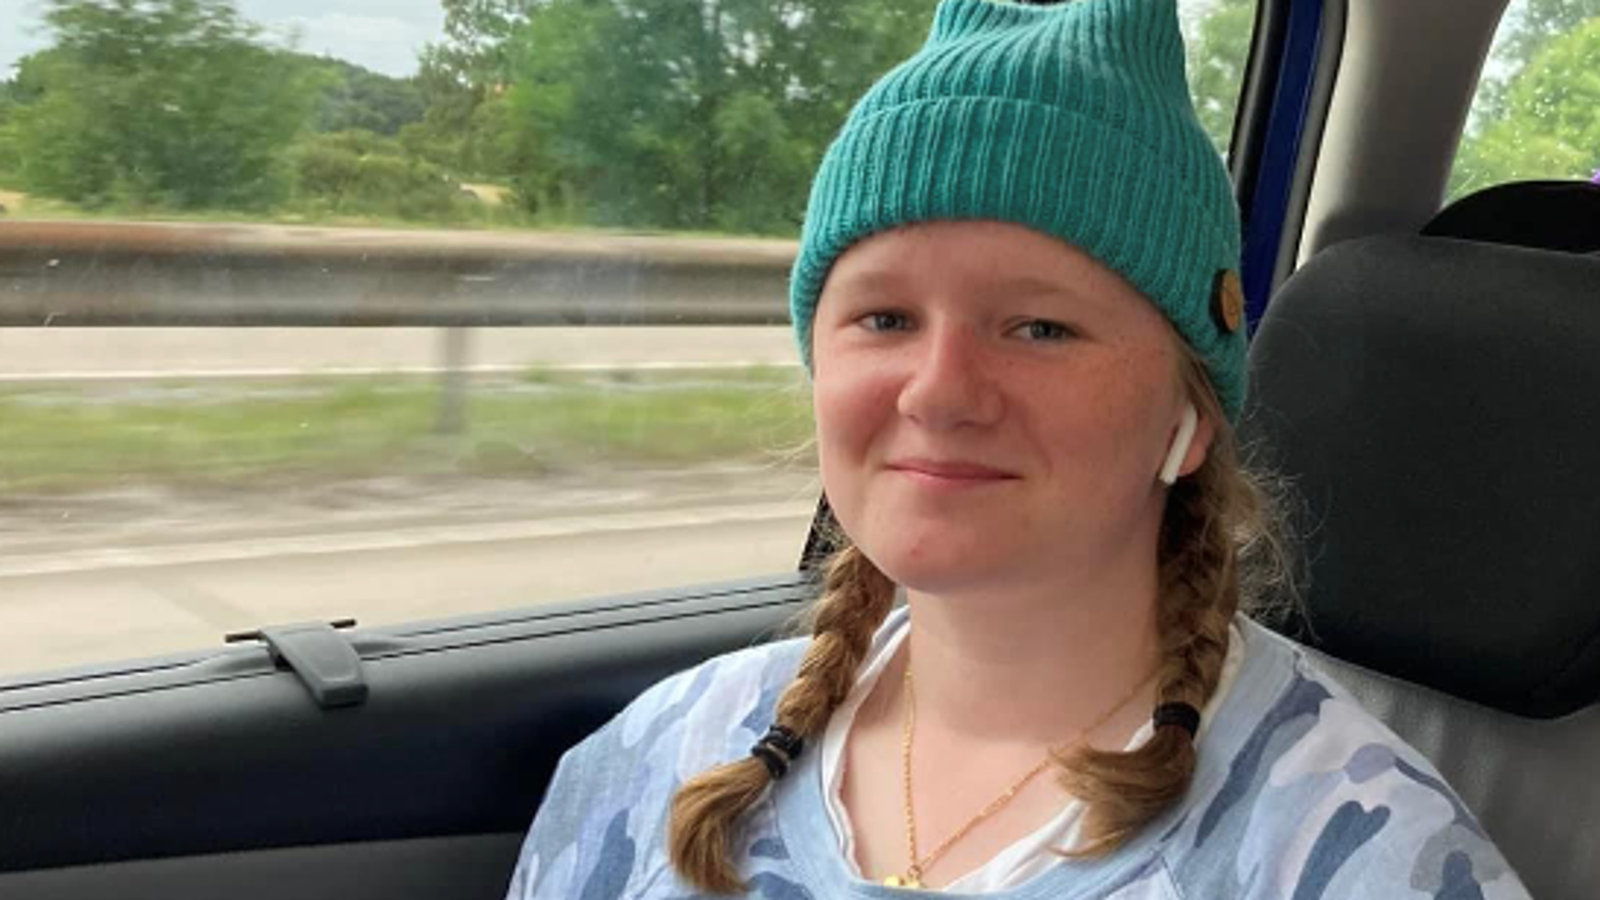 Jessica Baker named as 15-year-old girl killed in M53 school bus crash